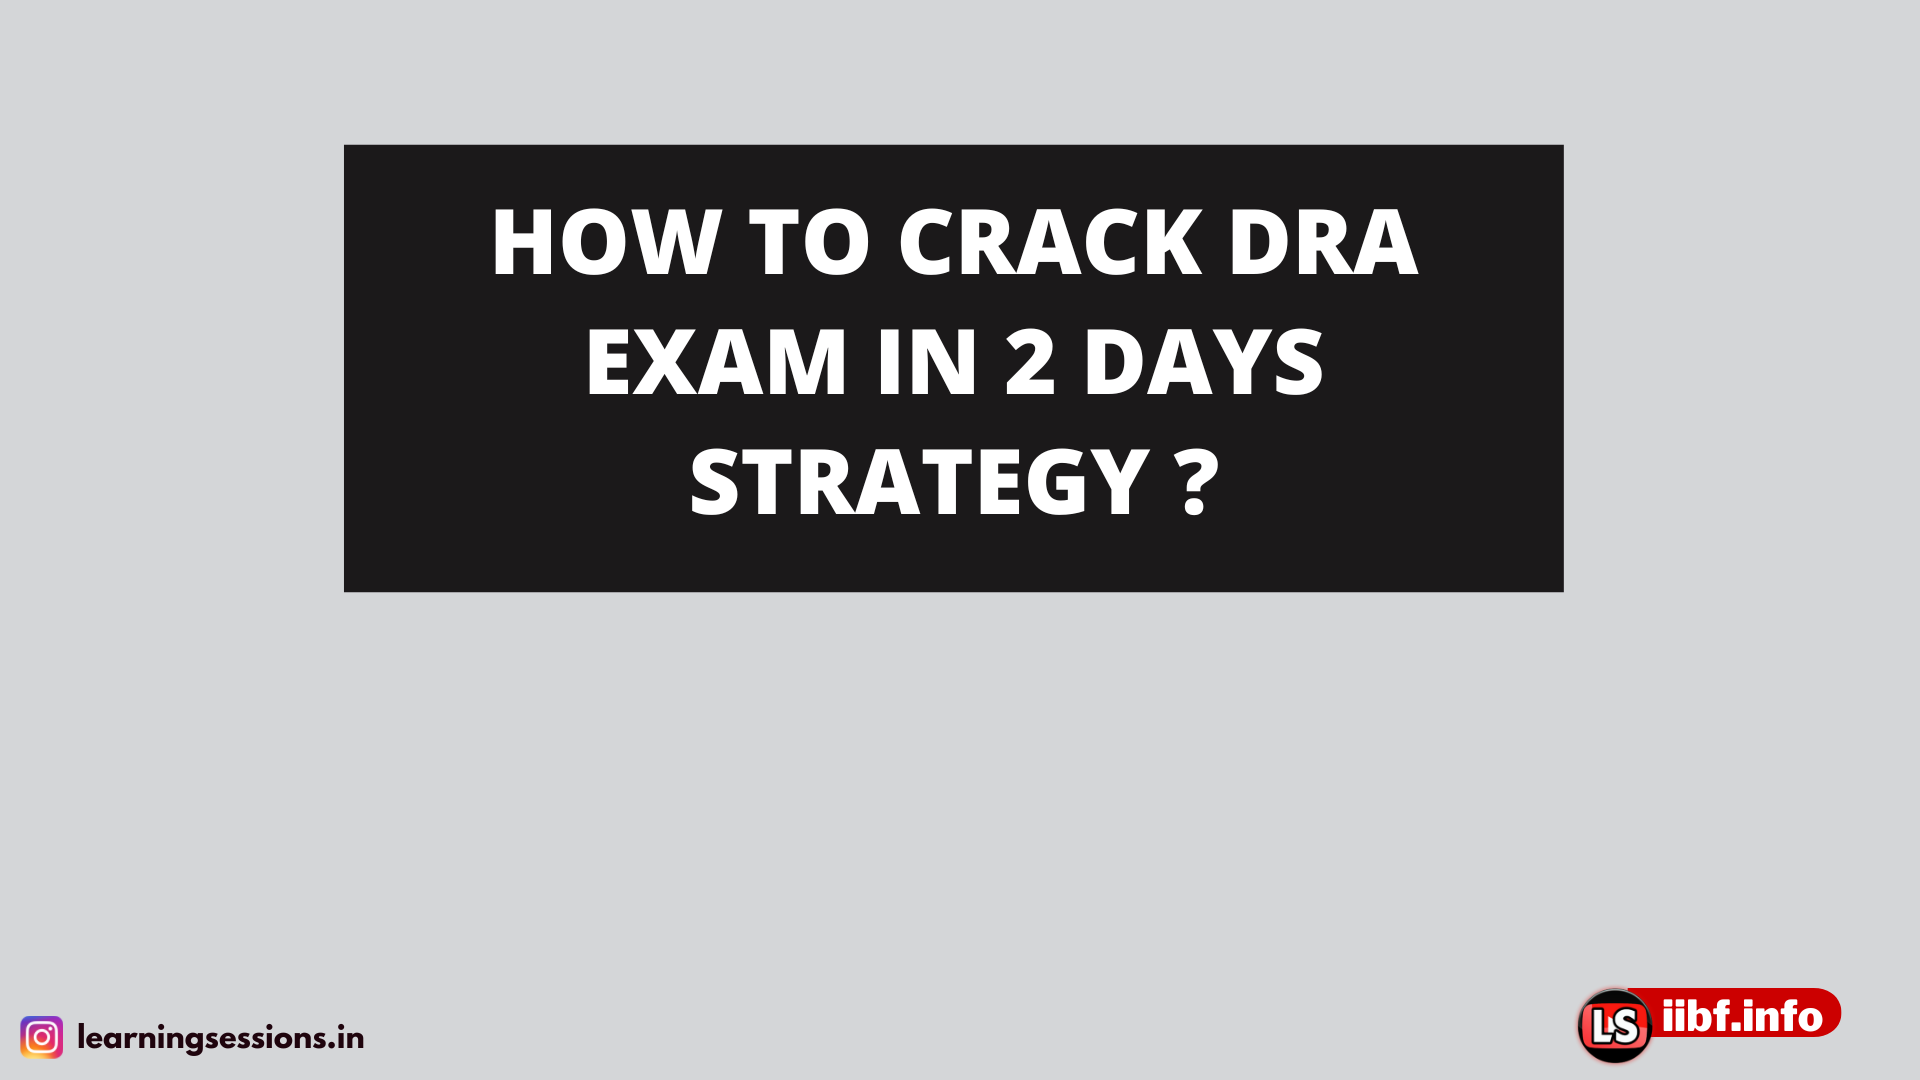 HOW TO CRACK DRA EXAM IN 2 DAYS STRATEGY ?